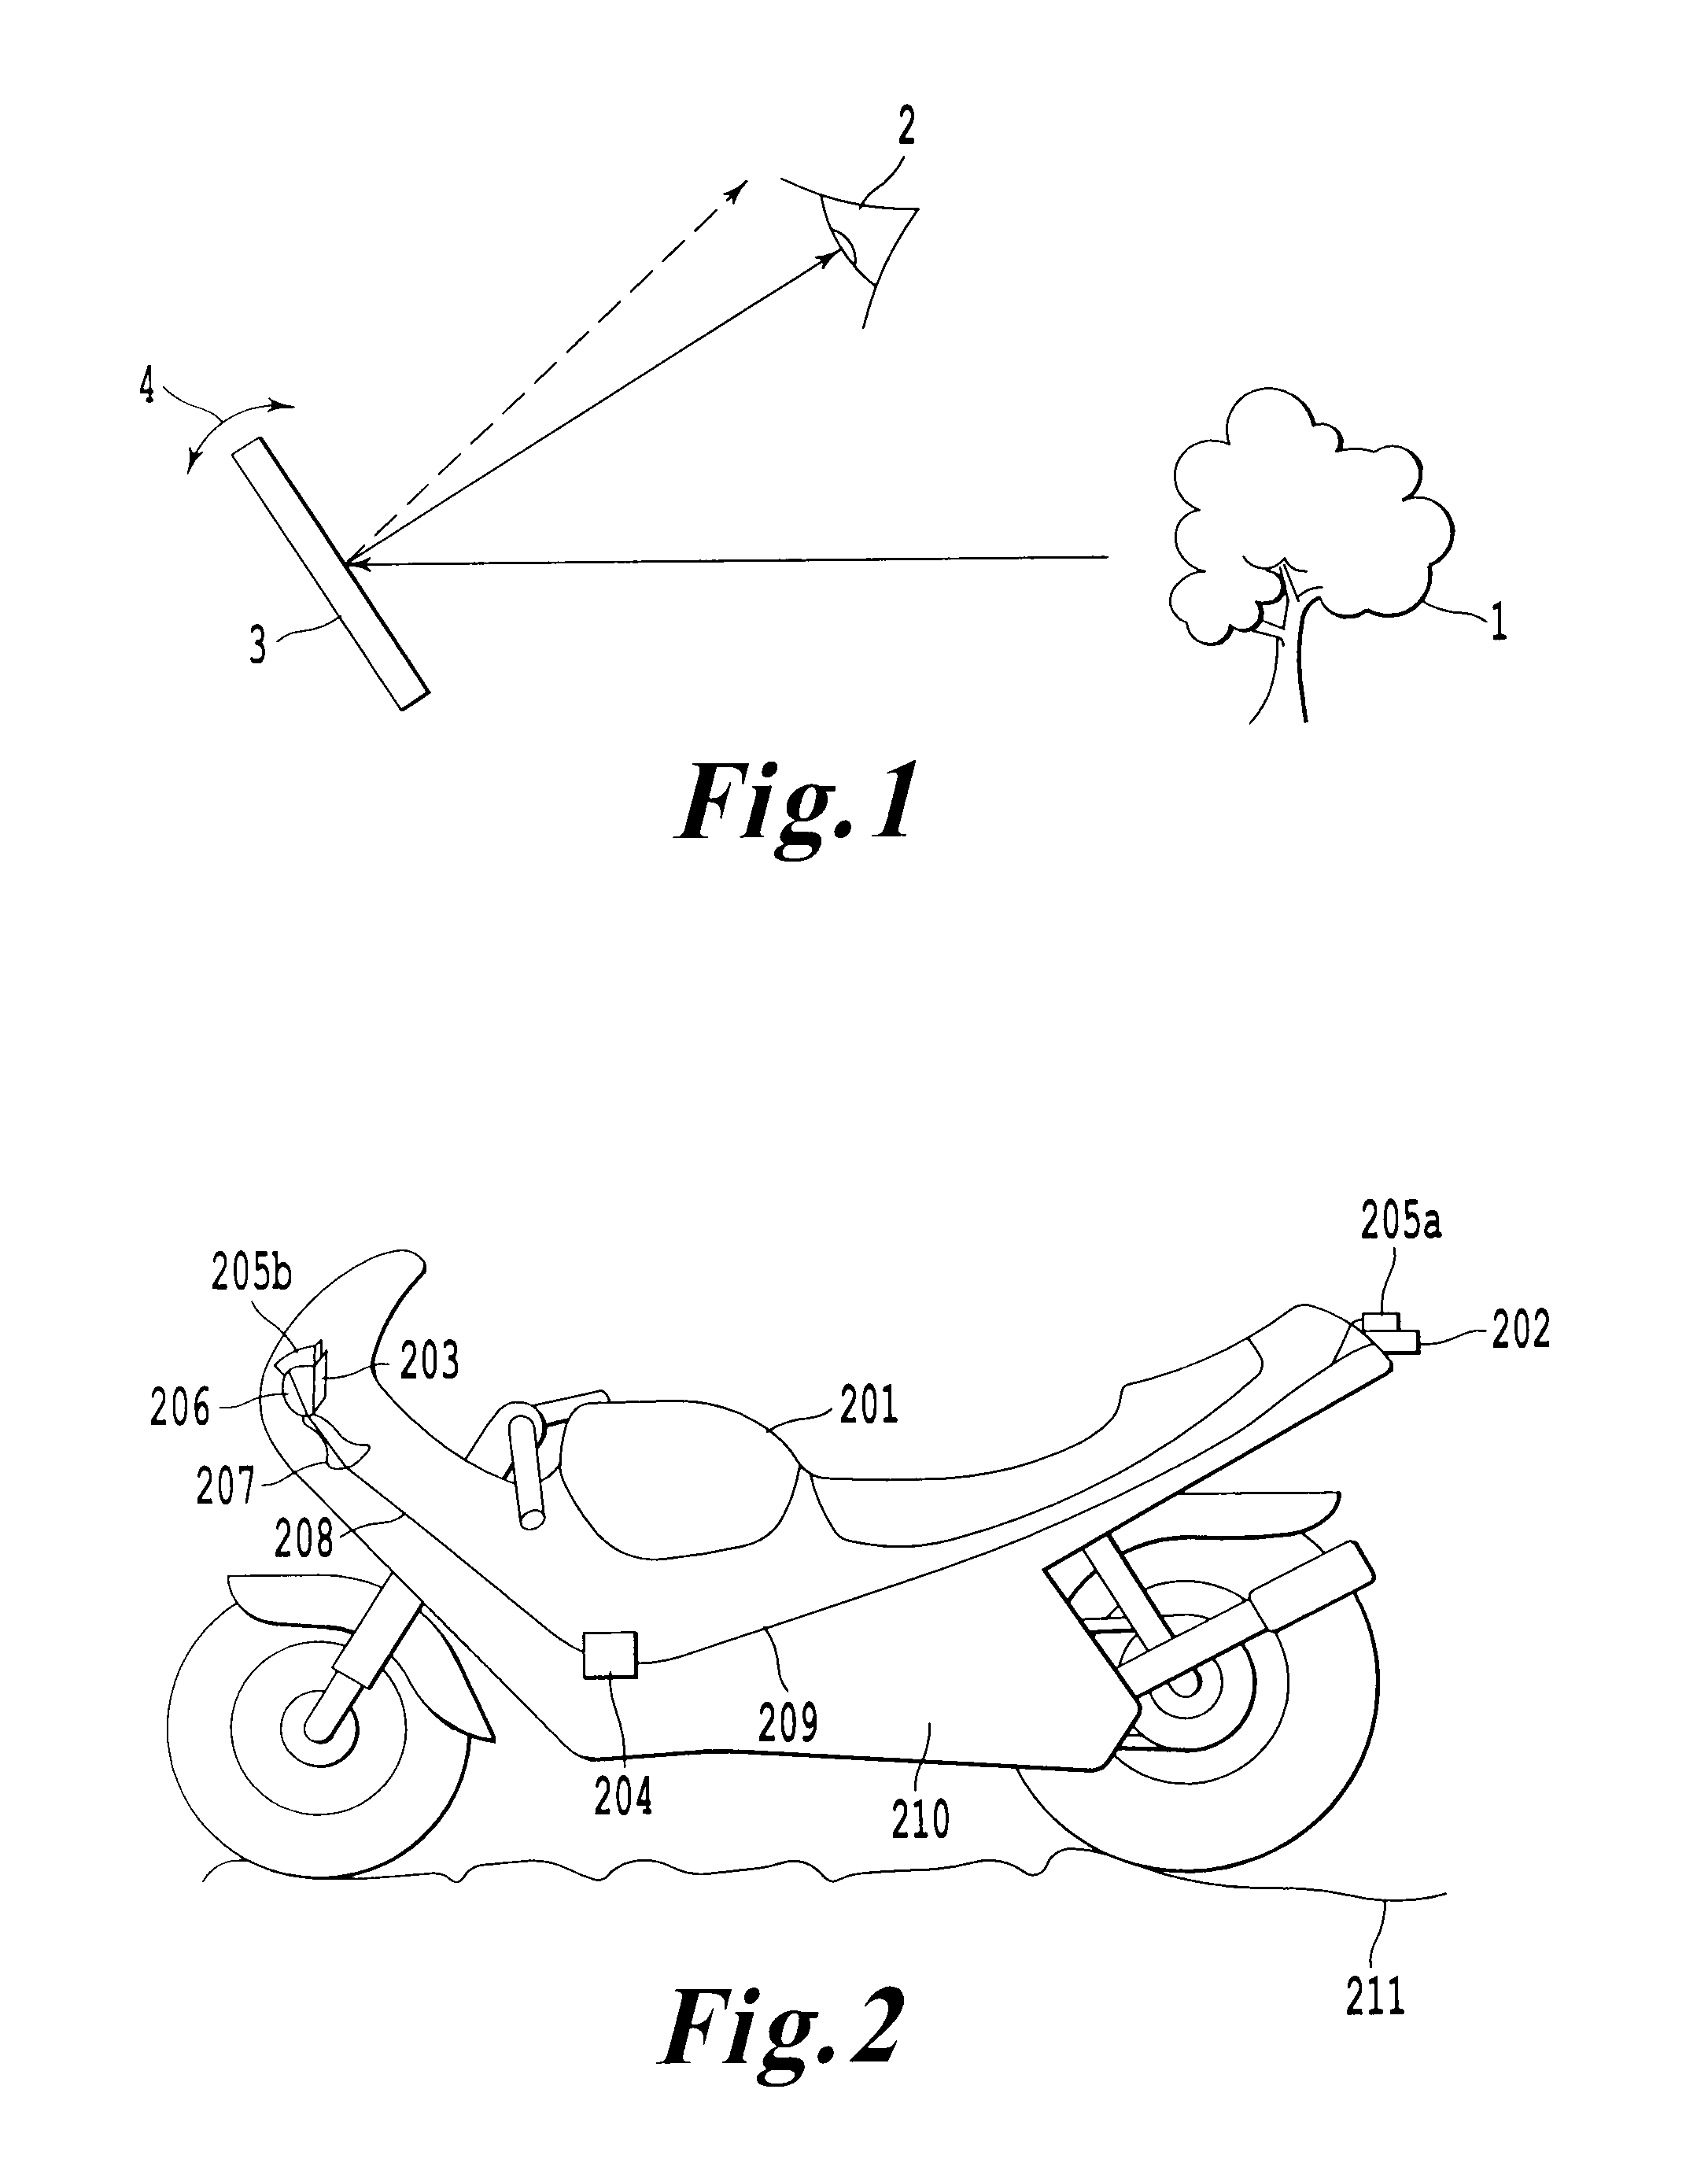 Rear-viewing system, rear-viewing device for vehicles and a method for displaying a stable image